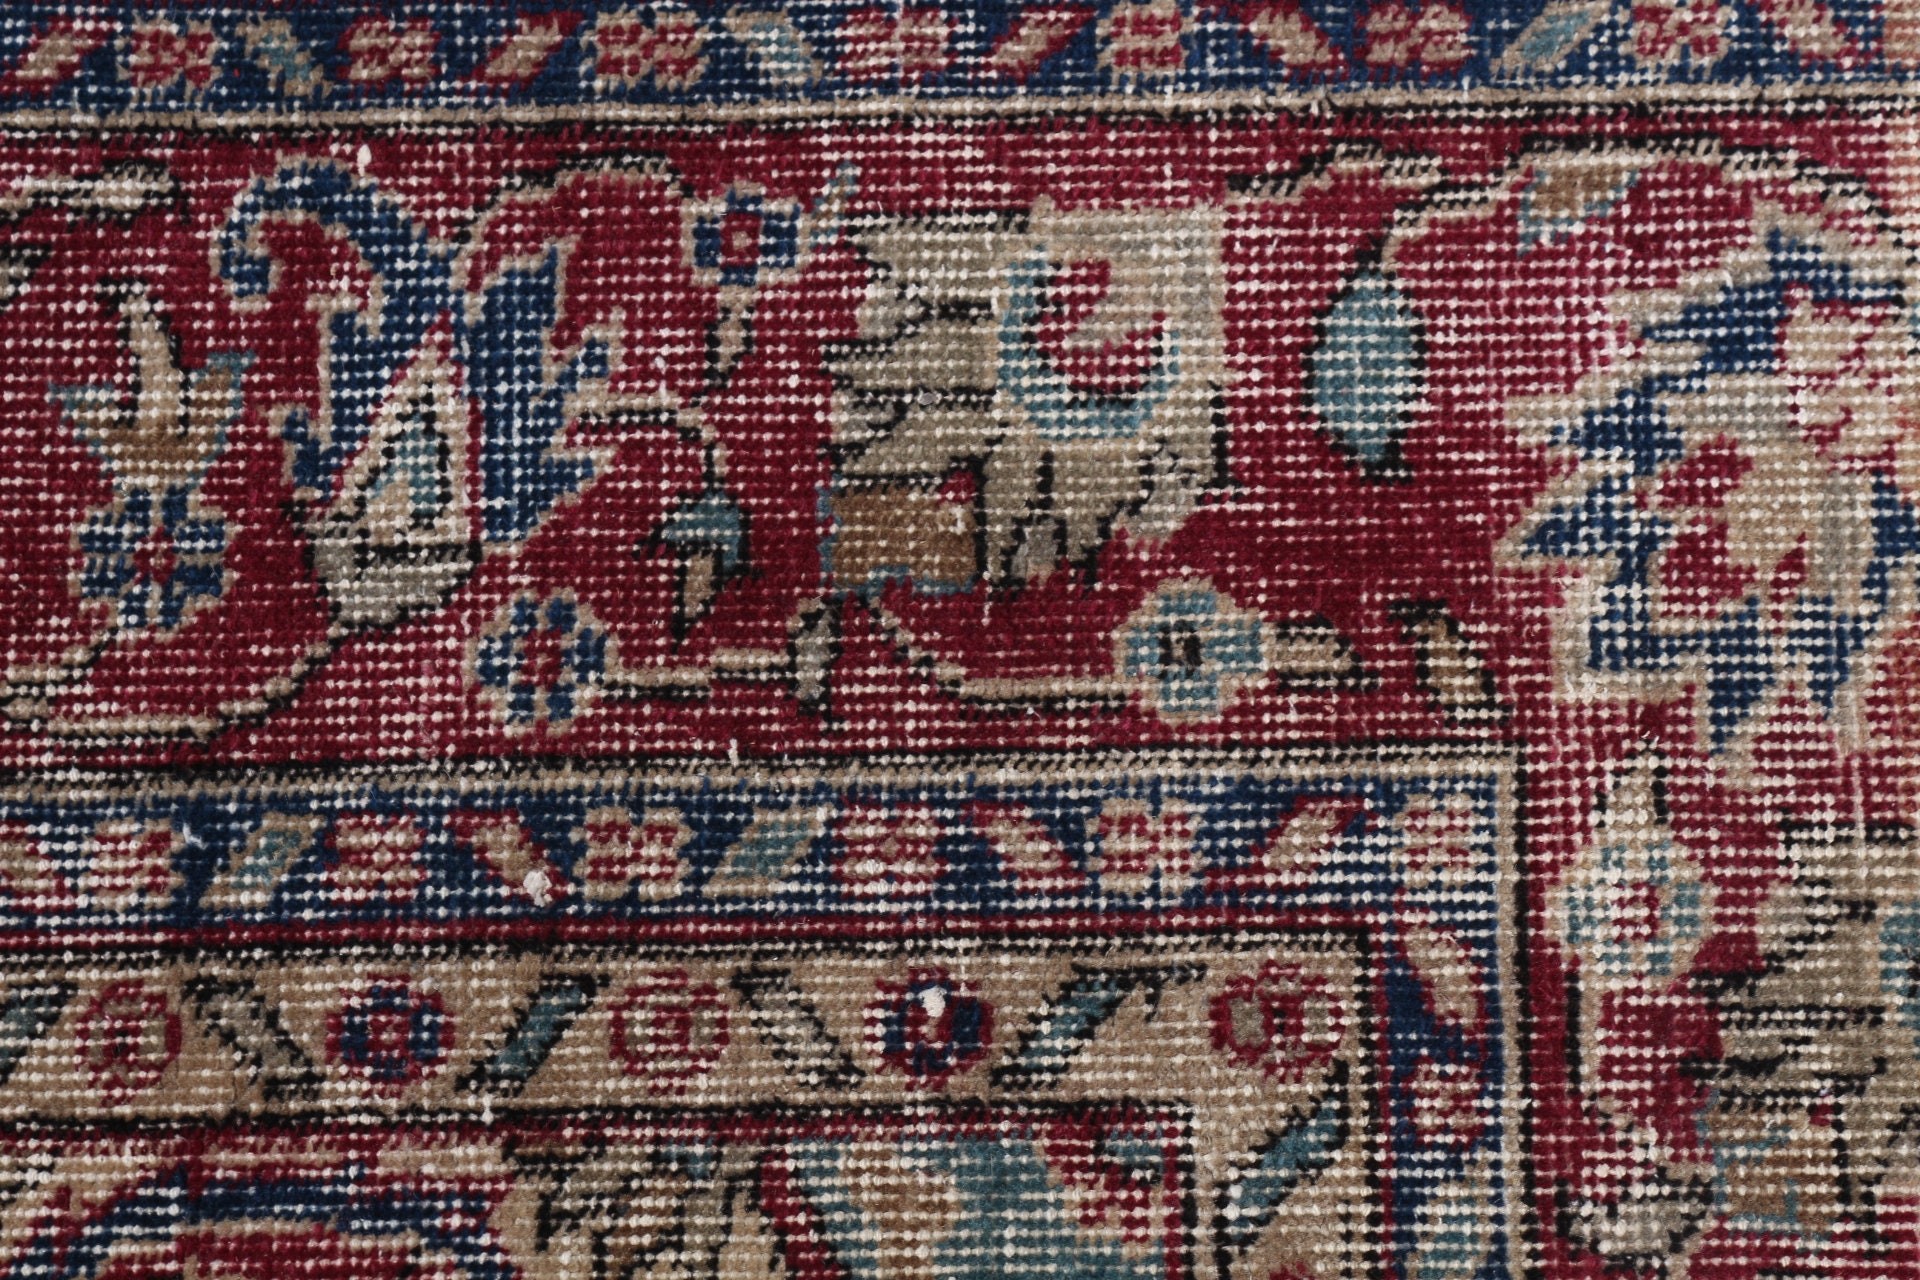 Bedroom Rugs, 1.5x2.4 ft Small Rugs, Vintage Rugs, Bath Rugs, Turkish Rug, Kitchen Rugs, Rugs for Bedroom, Antique Rugs, Red Antique Rugs